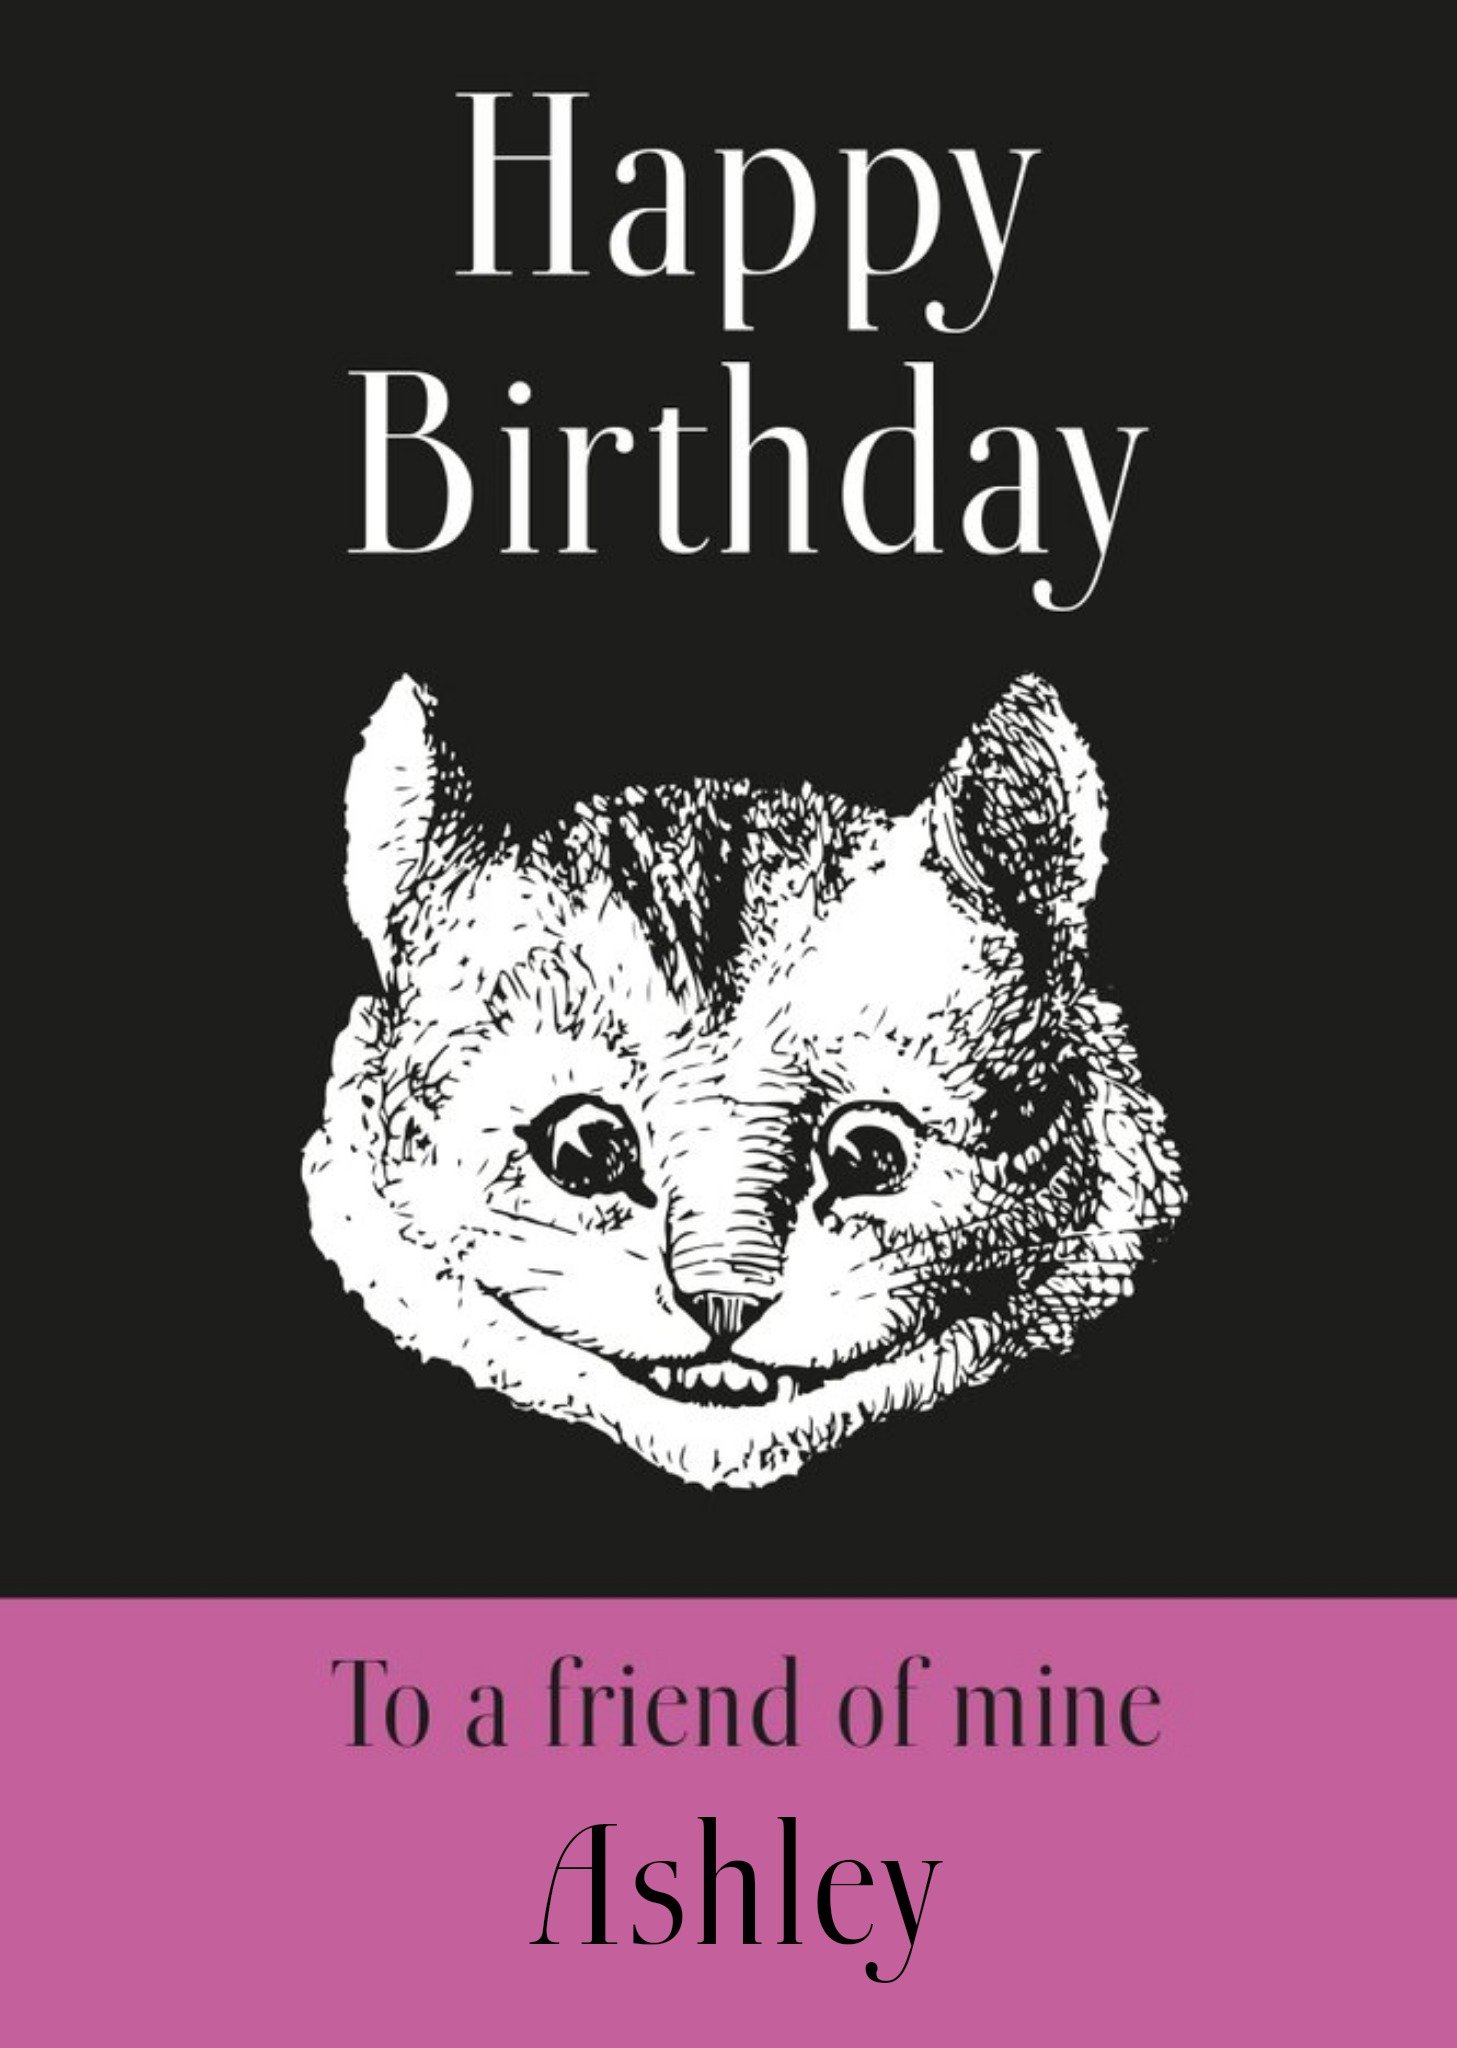 The V&a V&a Alice In Wonderland Illustration Cheshire Cat Birthday Card, Large